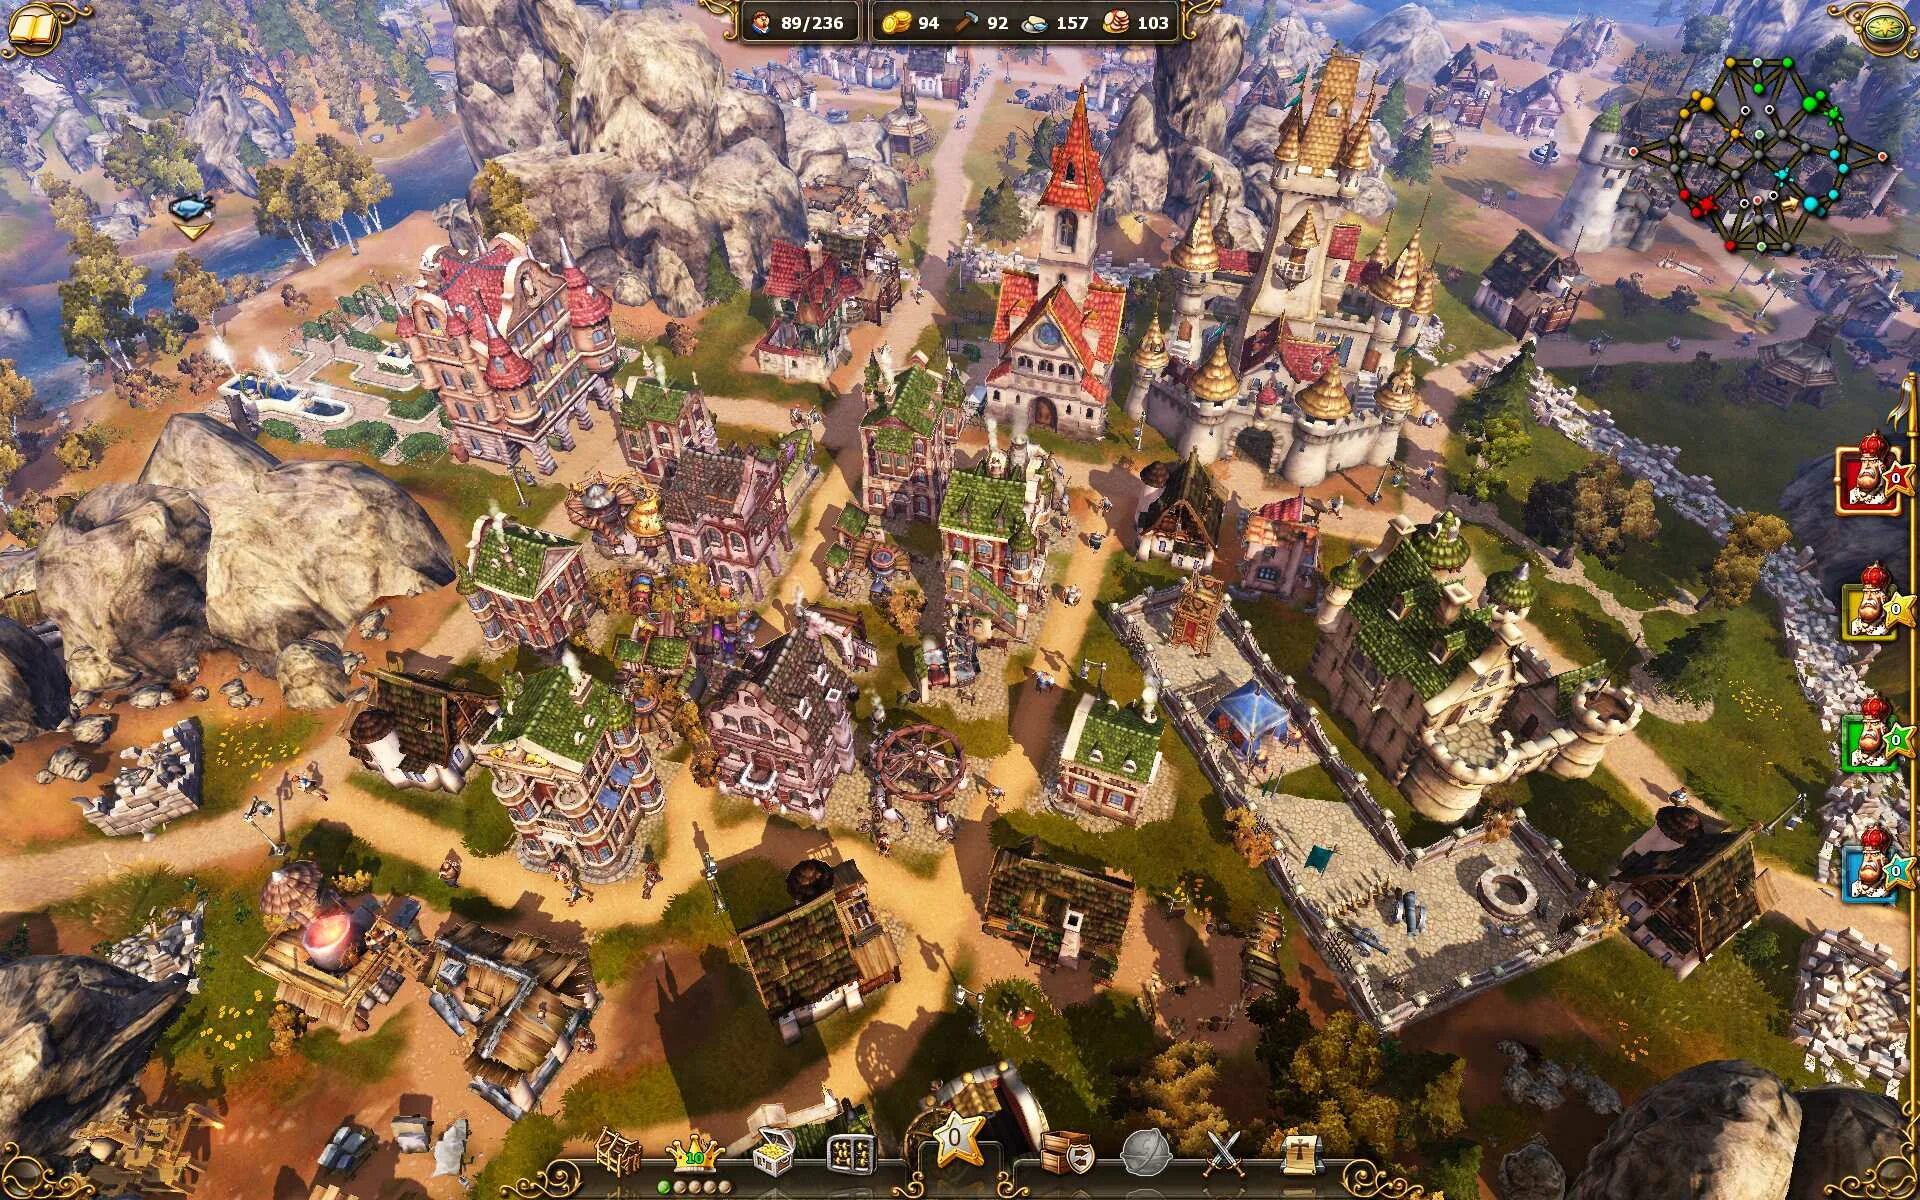 22 7 игра. Игра Settlers 7. The Settlers 7 Paths to a Kingdom. The Settlers 7: History Edition. Settlers 7 золотое издание.